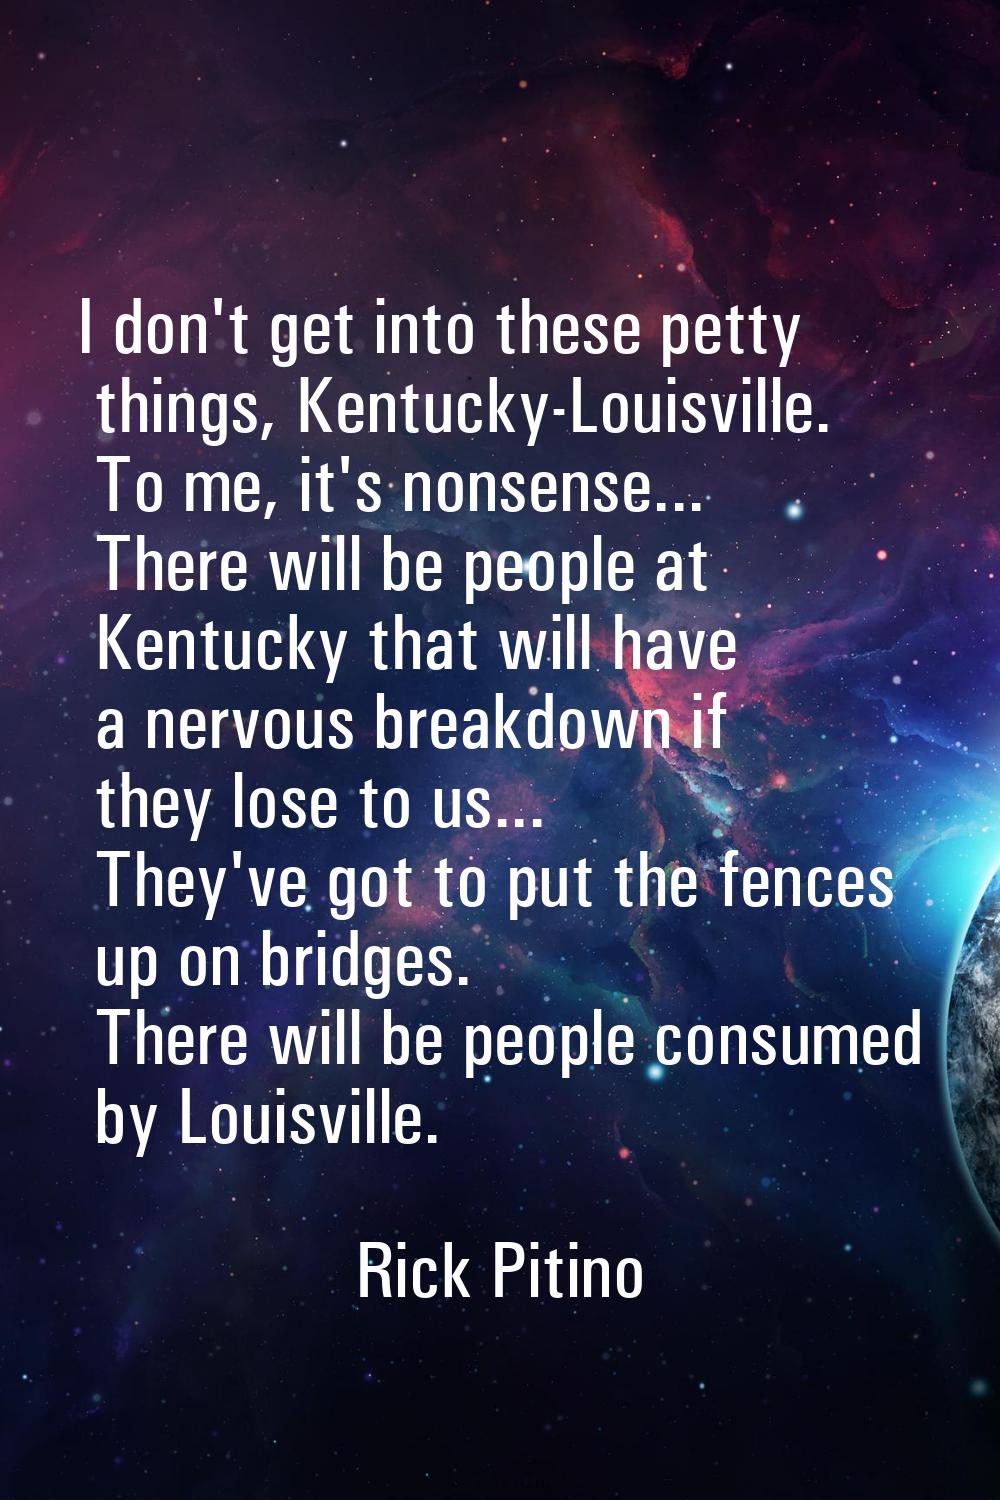 I don't get into these petty things, Kentucky-Louisville. To me, it's nonsense... There will be peo